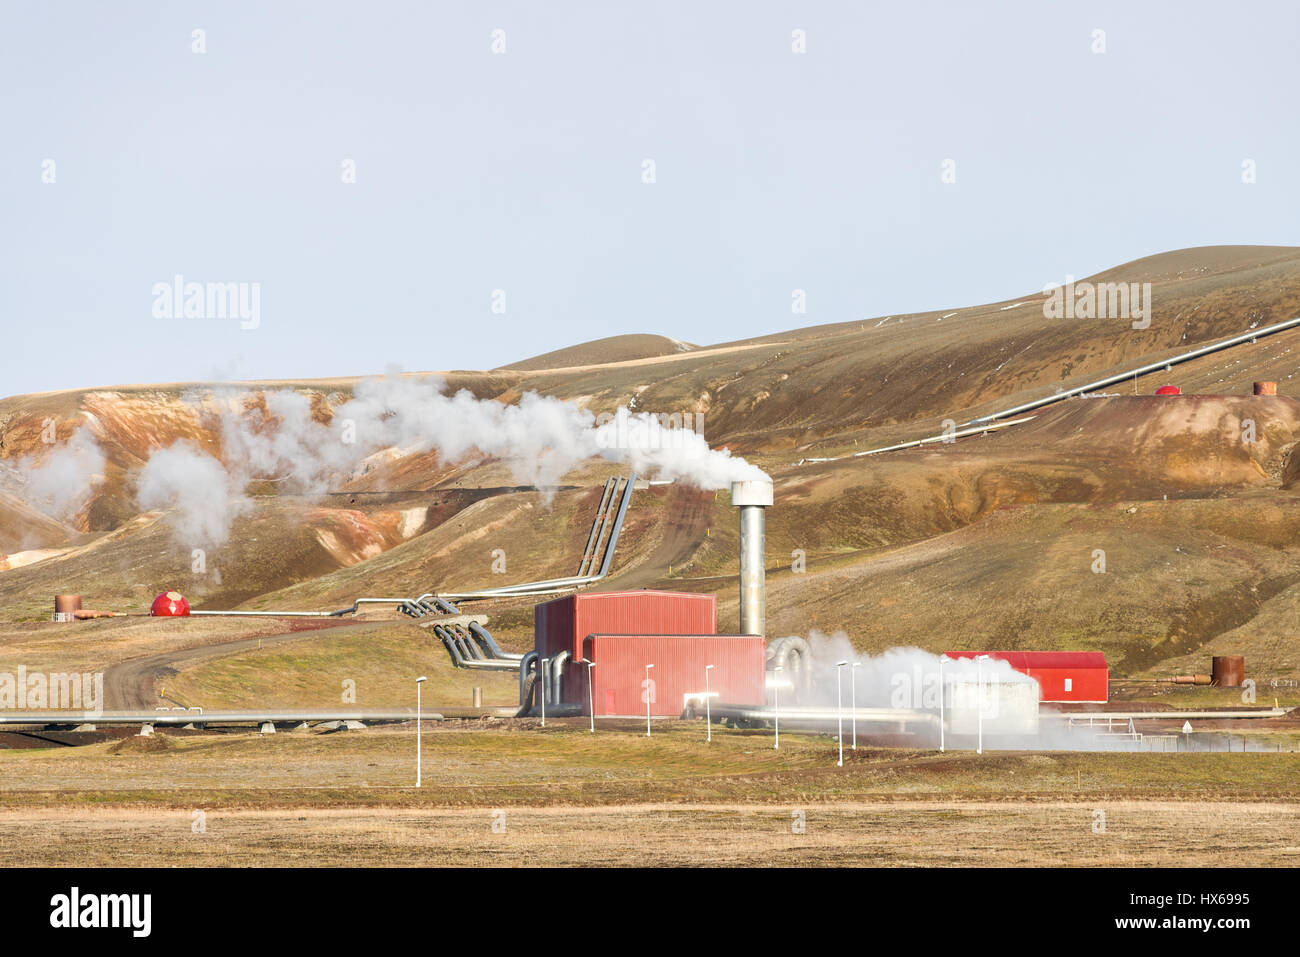 Krafla geothermal power plant with steam coming out of the chimney, Iceland Stock Photo